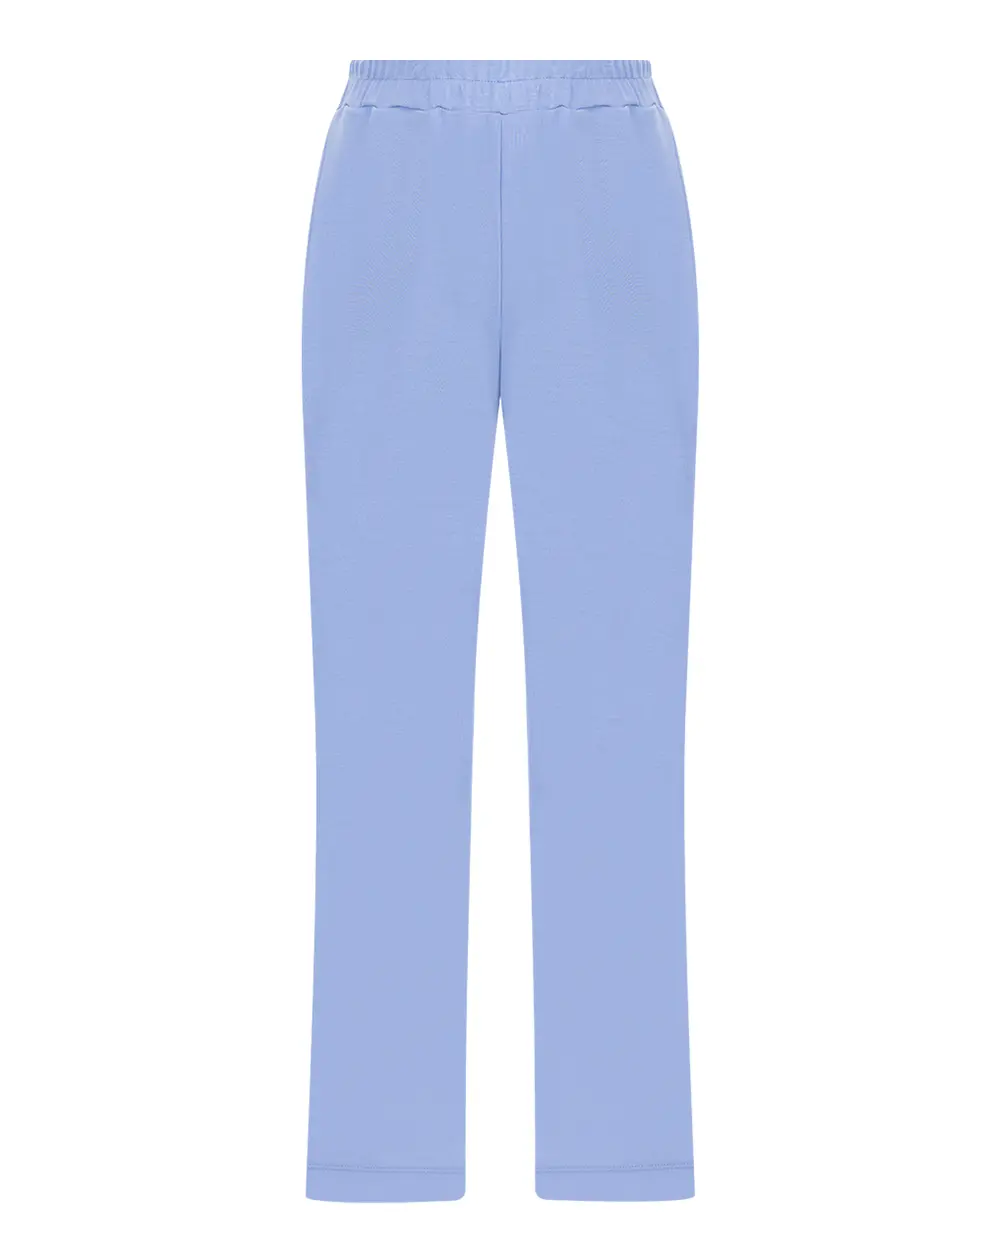 Plus Size Knitted Fabric Full Length Trousers